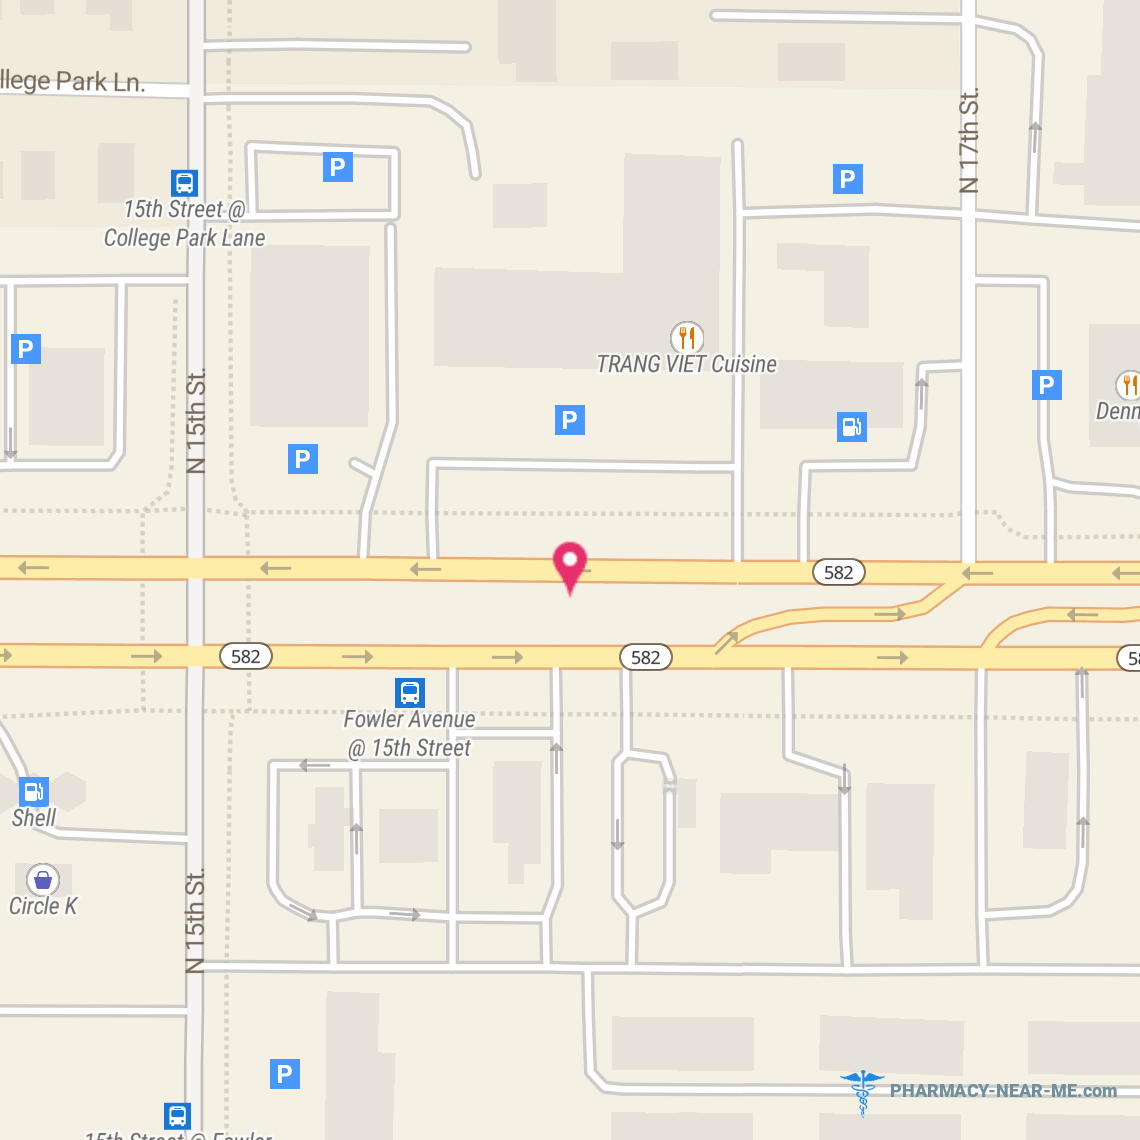 DS RX LLC - Pharmacy Hours, Phone, Reviews & Information: 1548 East Fowler Avenue, Tampa, Florida 33612, United States